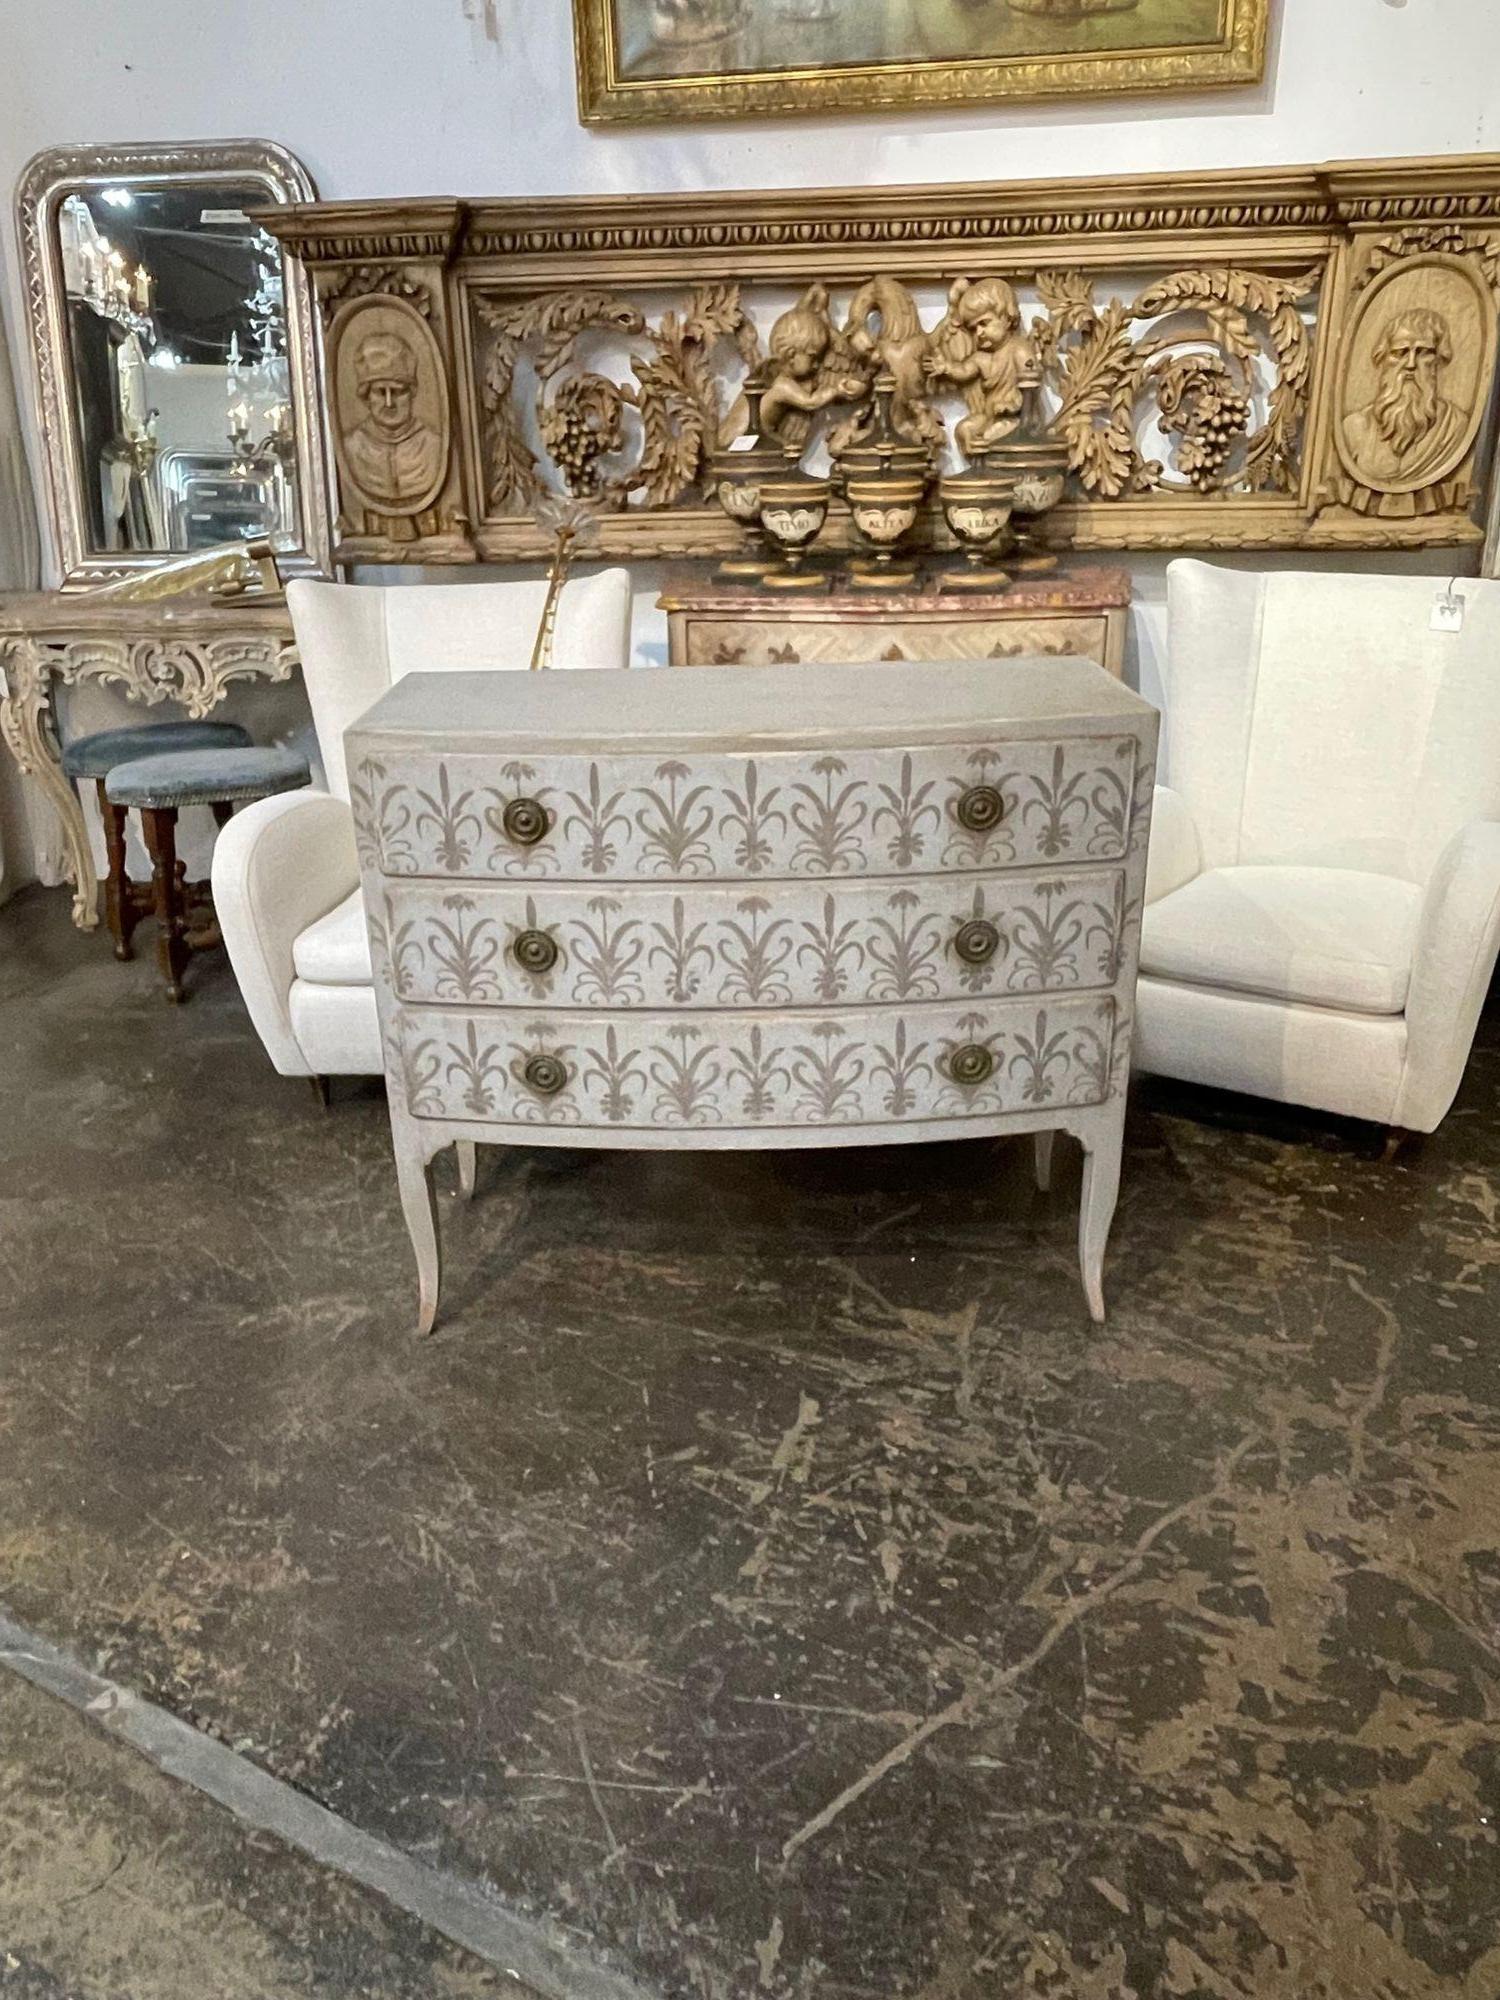 Lovely 19th century Italian curved front Neo-Classical painted commode. Beautiful patina and design on this piece. So pretty!!